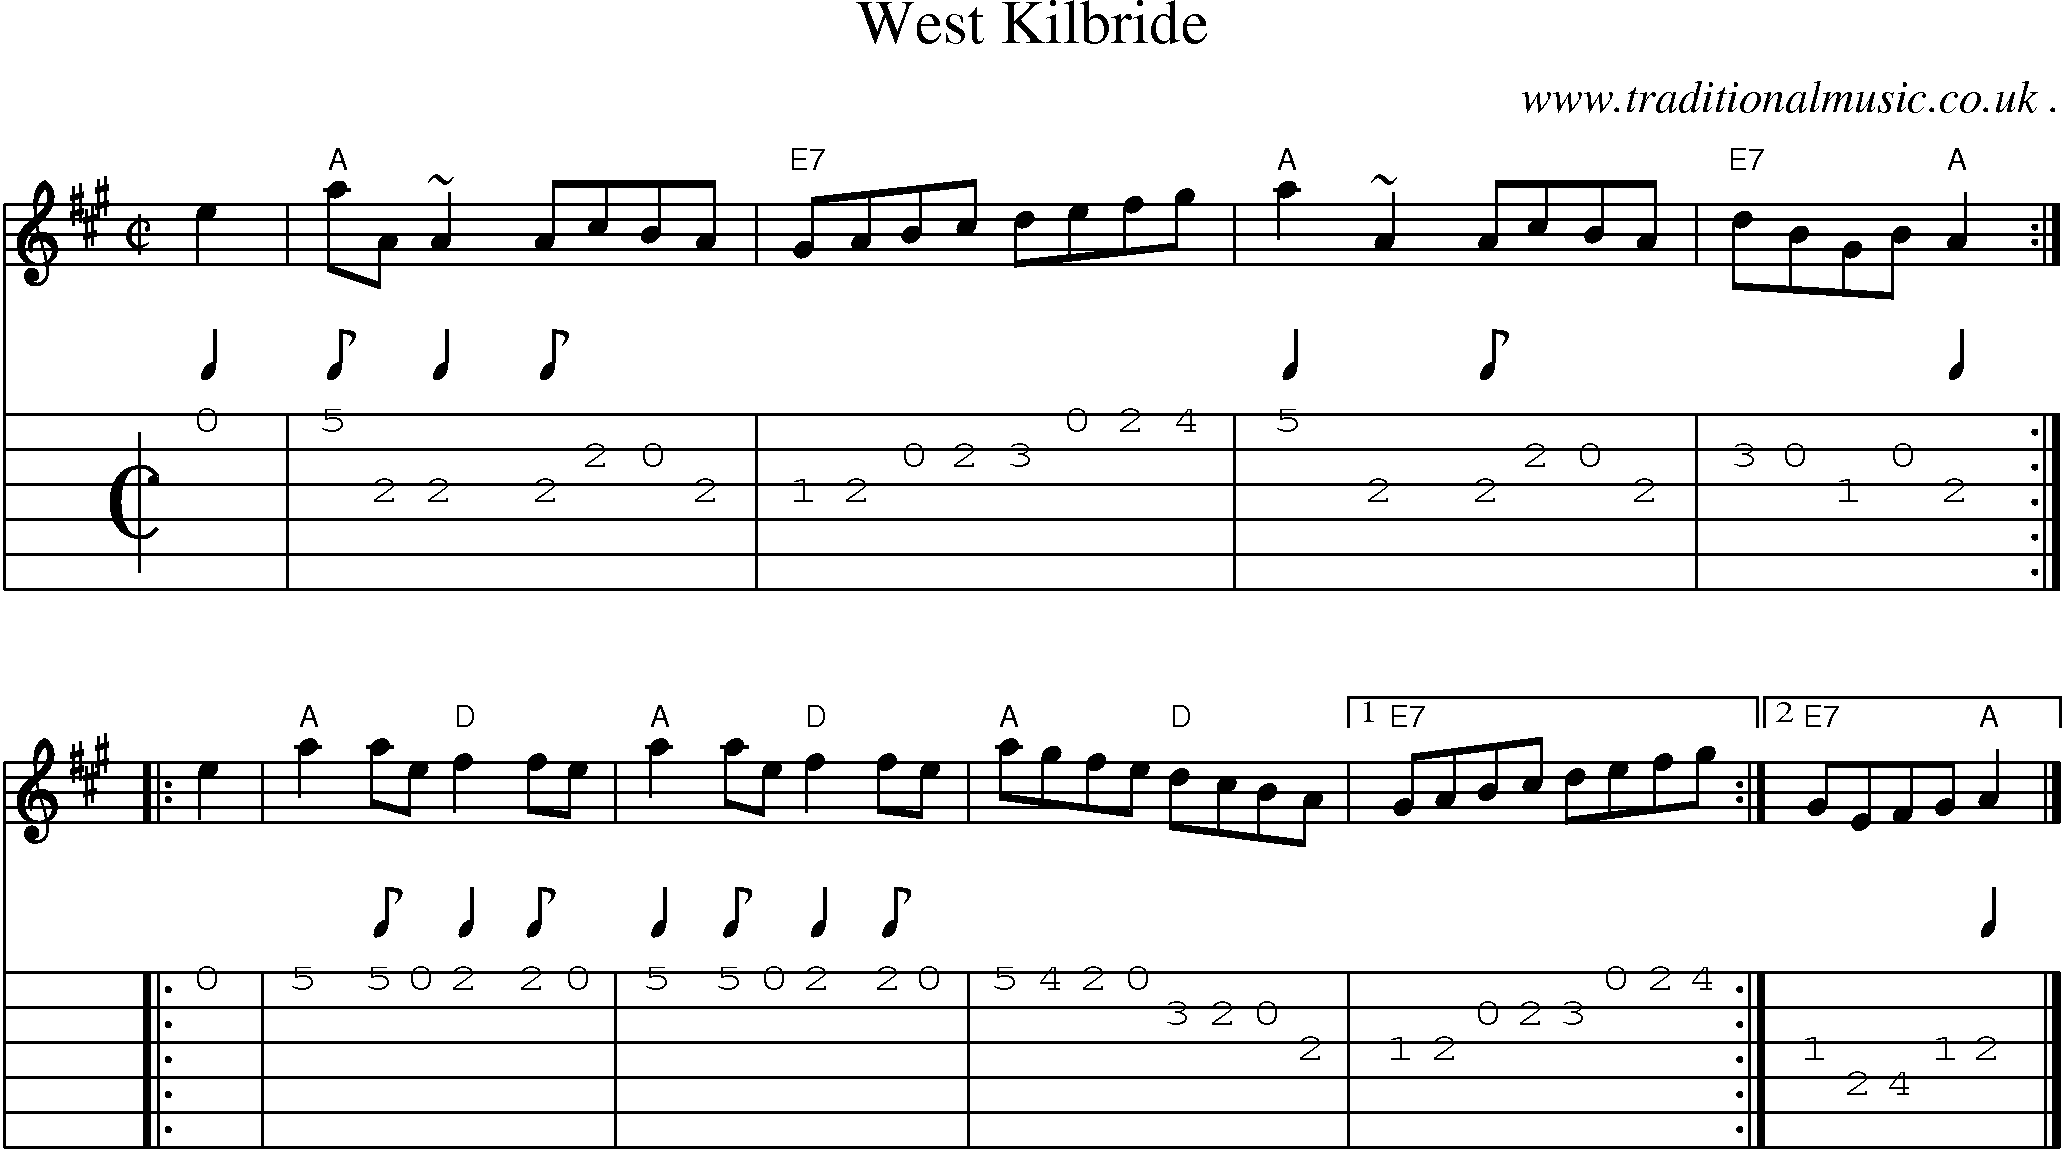 Sheet-music  score, Chords and Guitar Tabs for West Kilbride